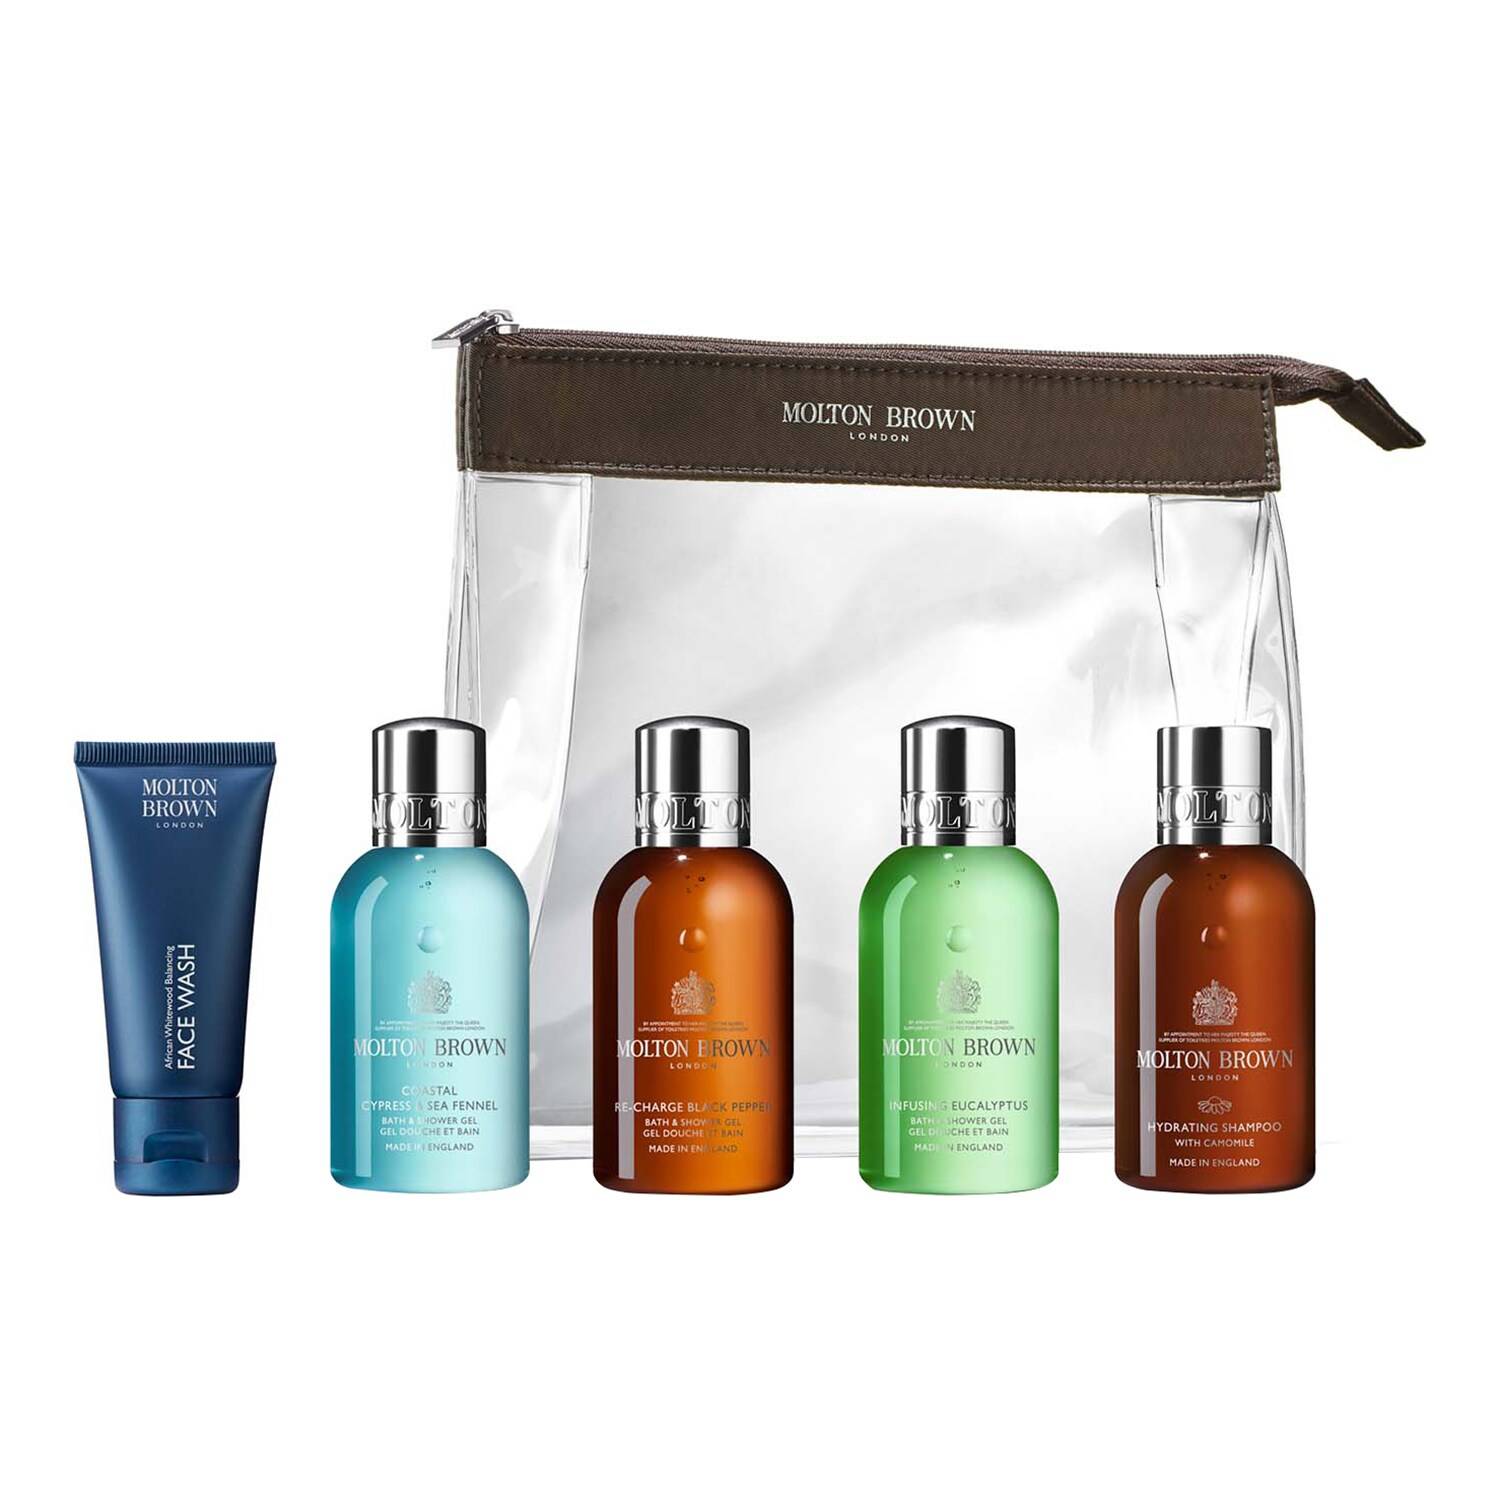 Molton Brown The Refreshed Adventurer Body & Hair Carry-On Bag Set